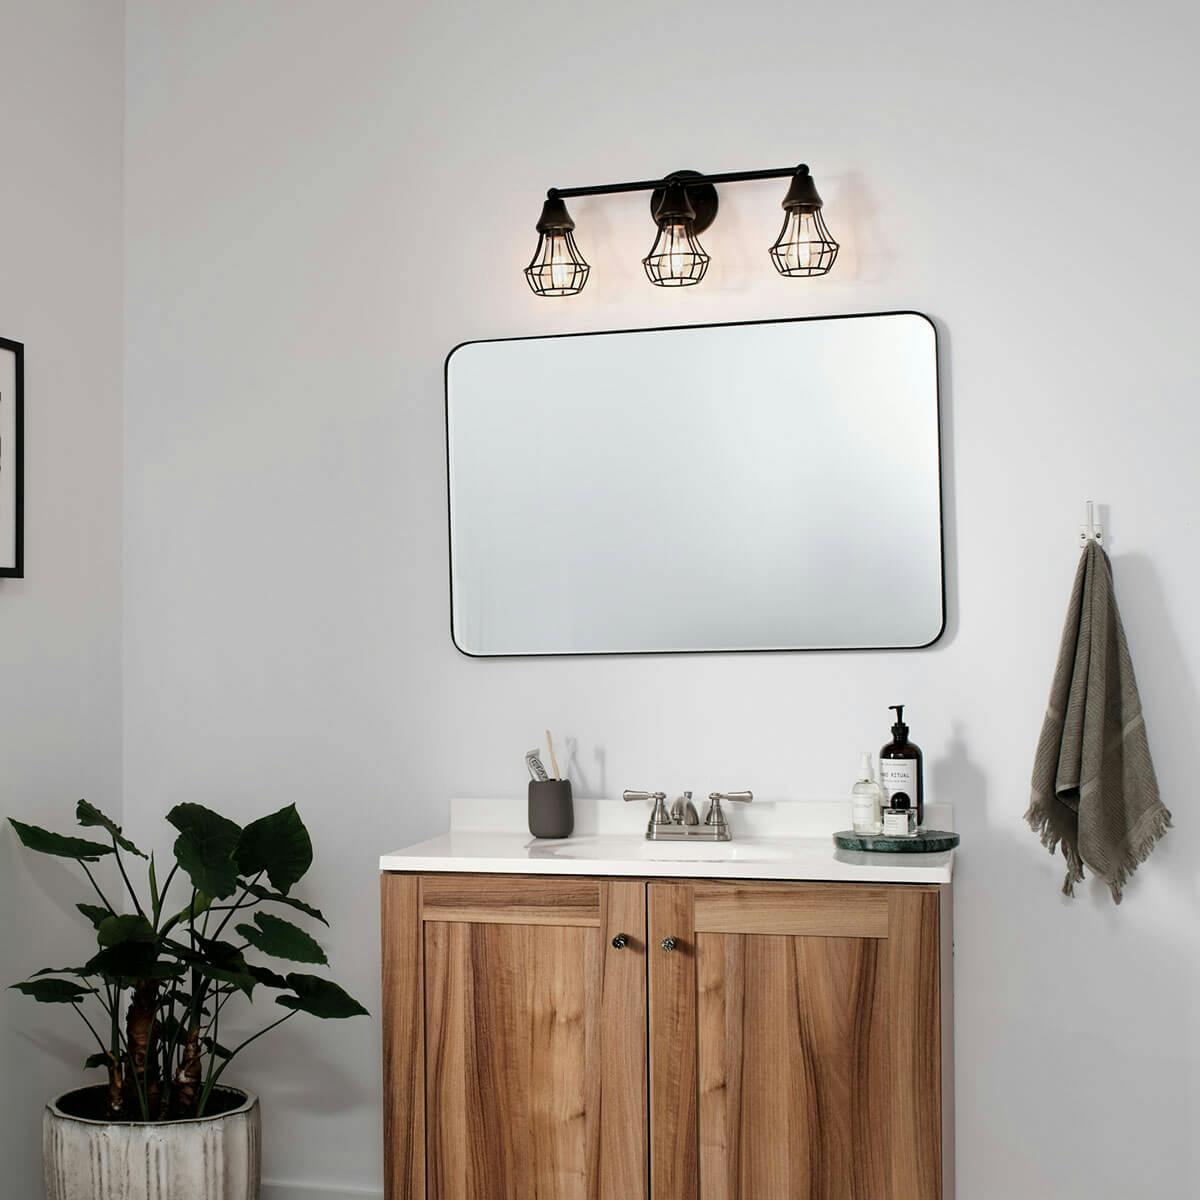 Day time Bathroom featuring Bayley vanity light 37510BK